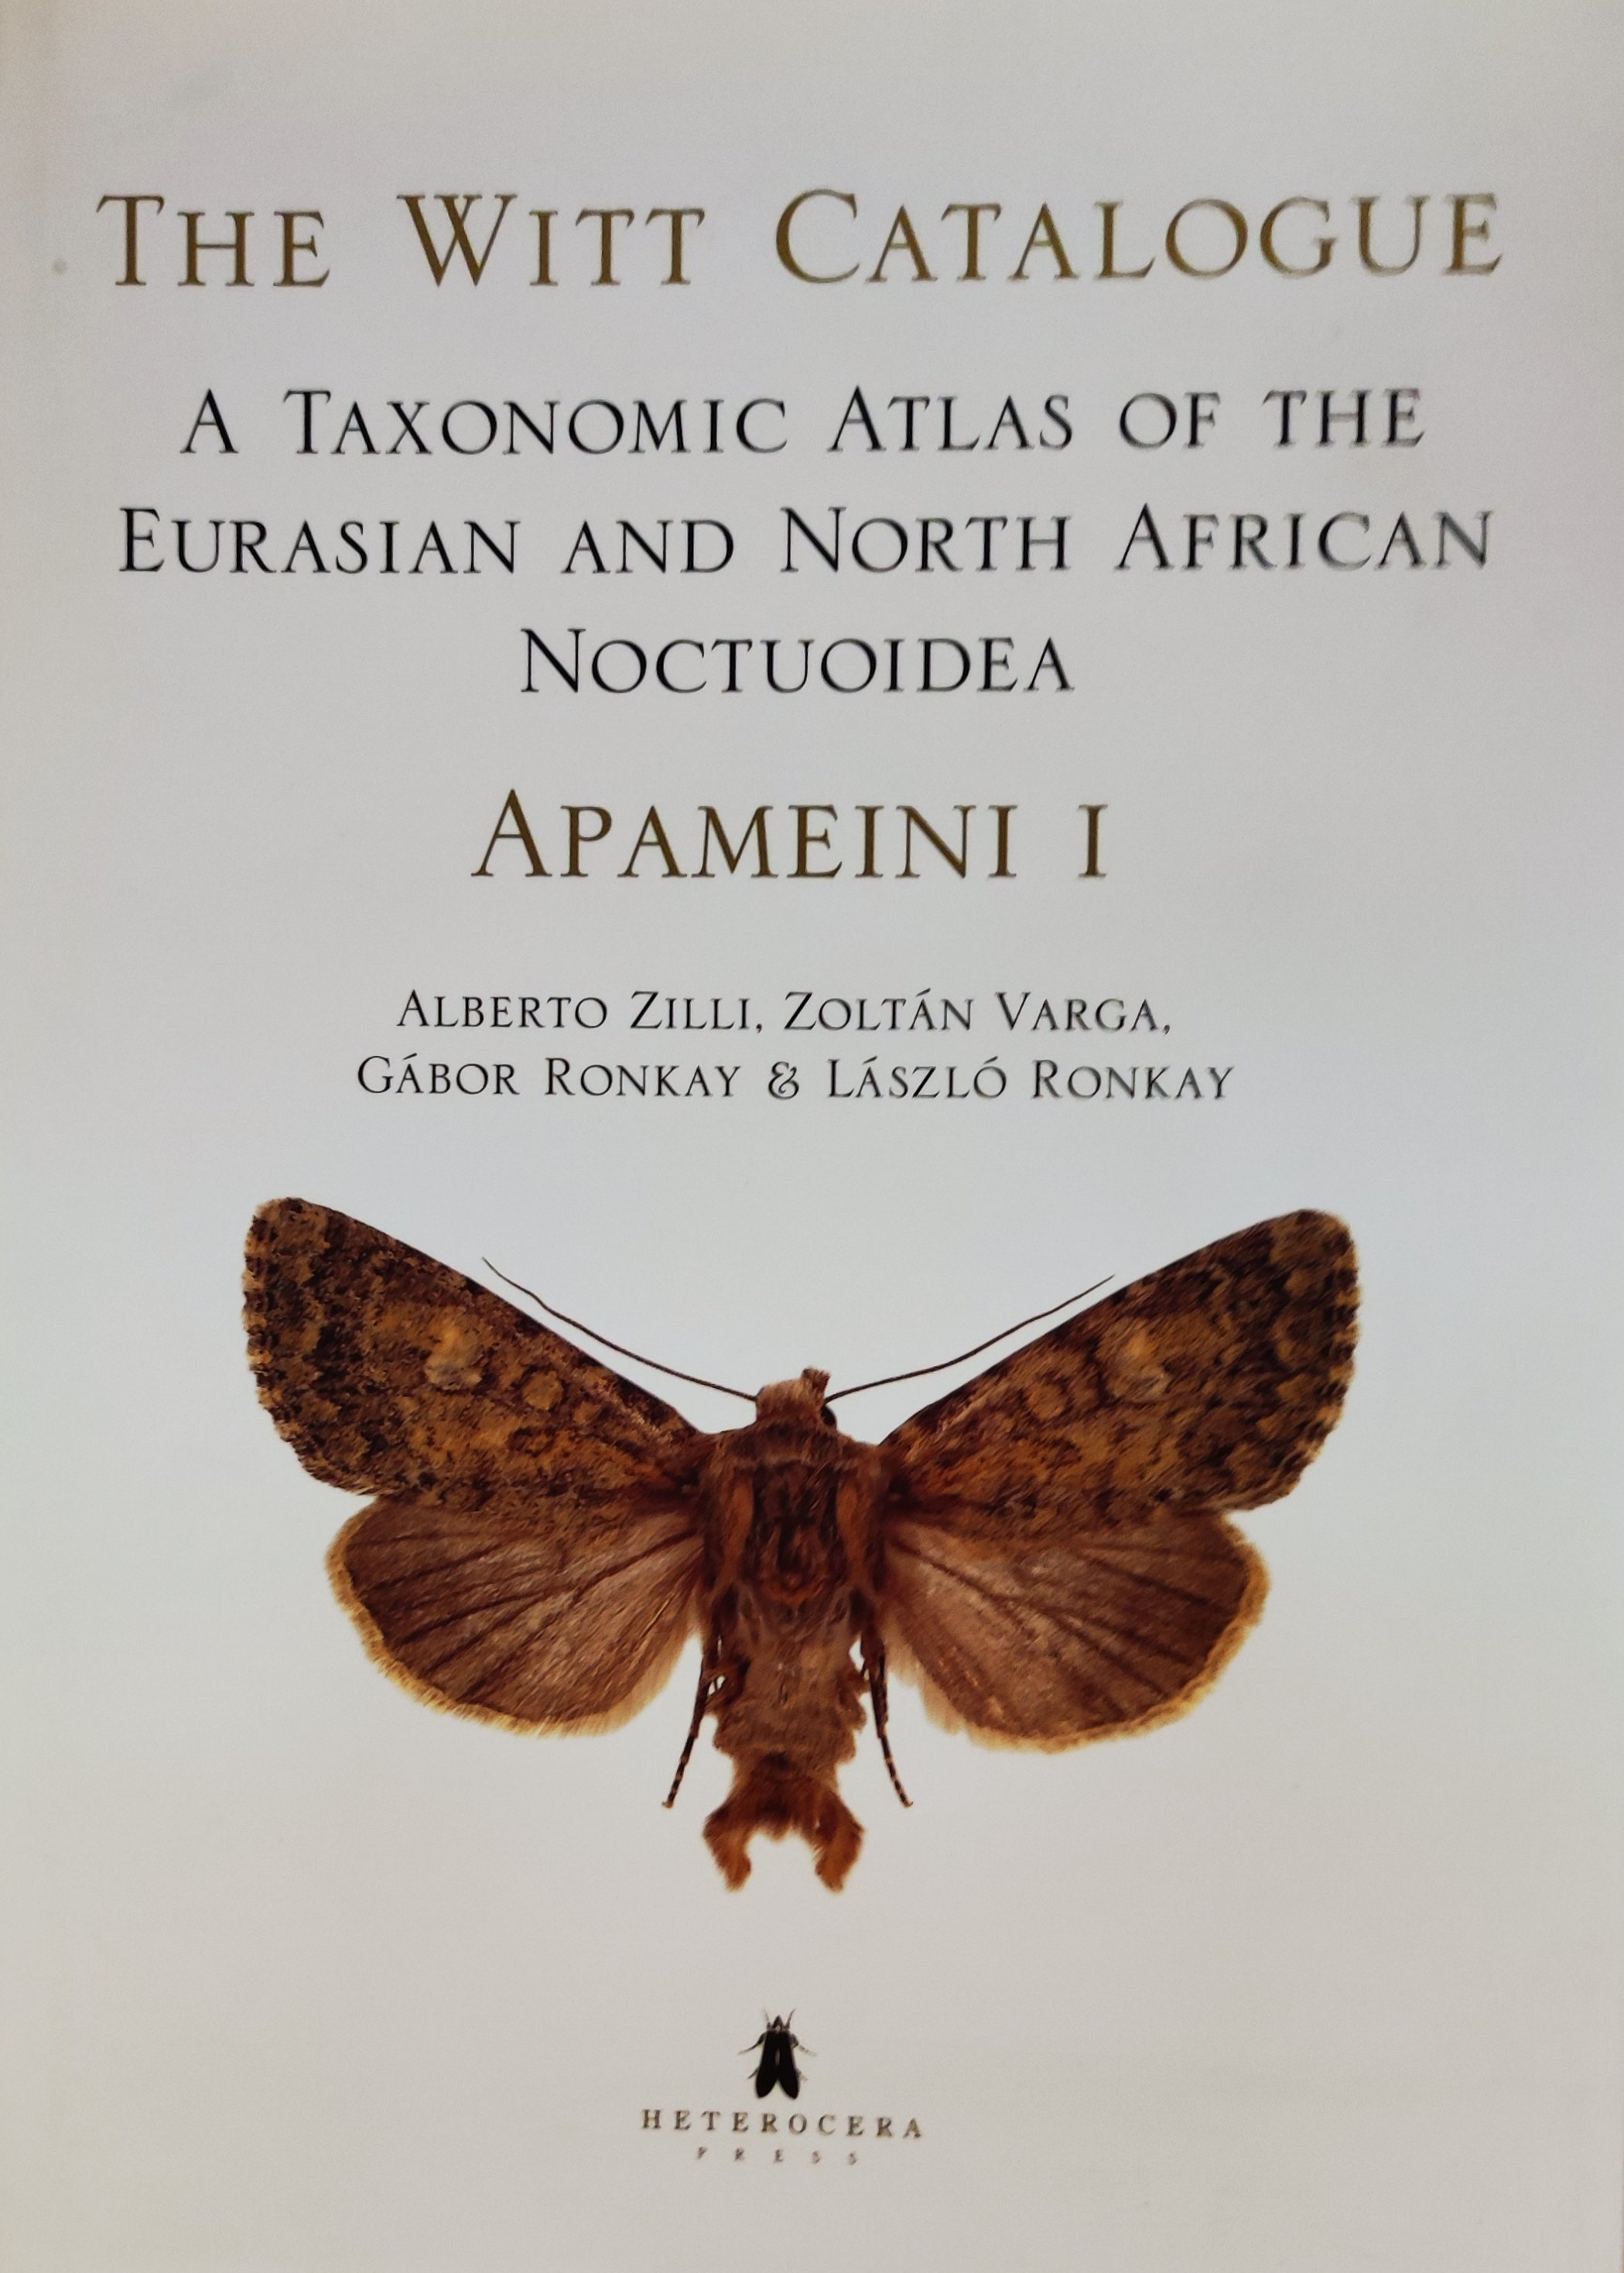 The Witt Catalogue: A Taxonomic Atlas of the Eurasian and North African Noctuoidea. volume 3. - Apameini 1. (Rippl-Rónai Múzeum CC BY-NC-ND)